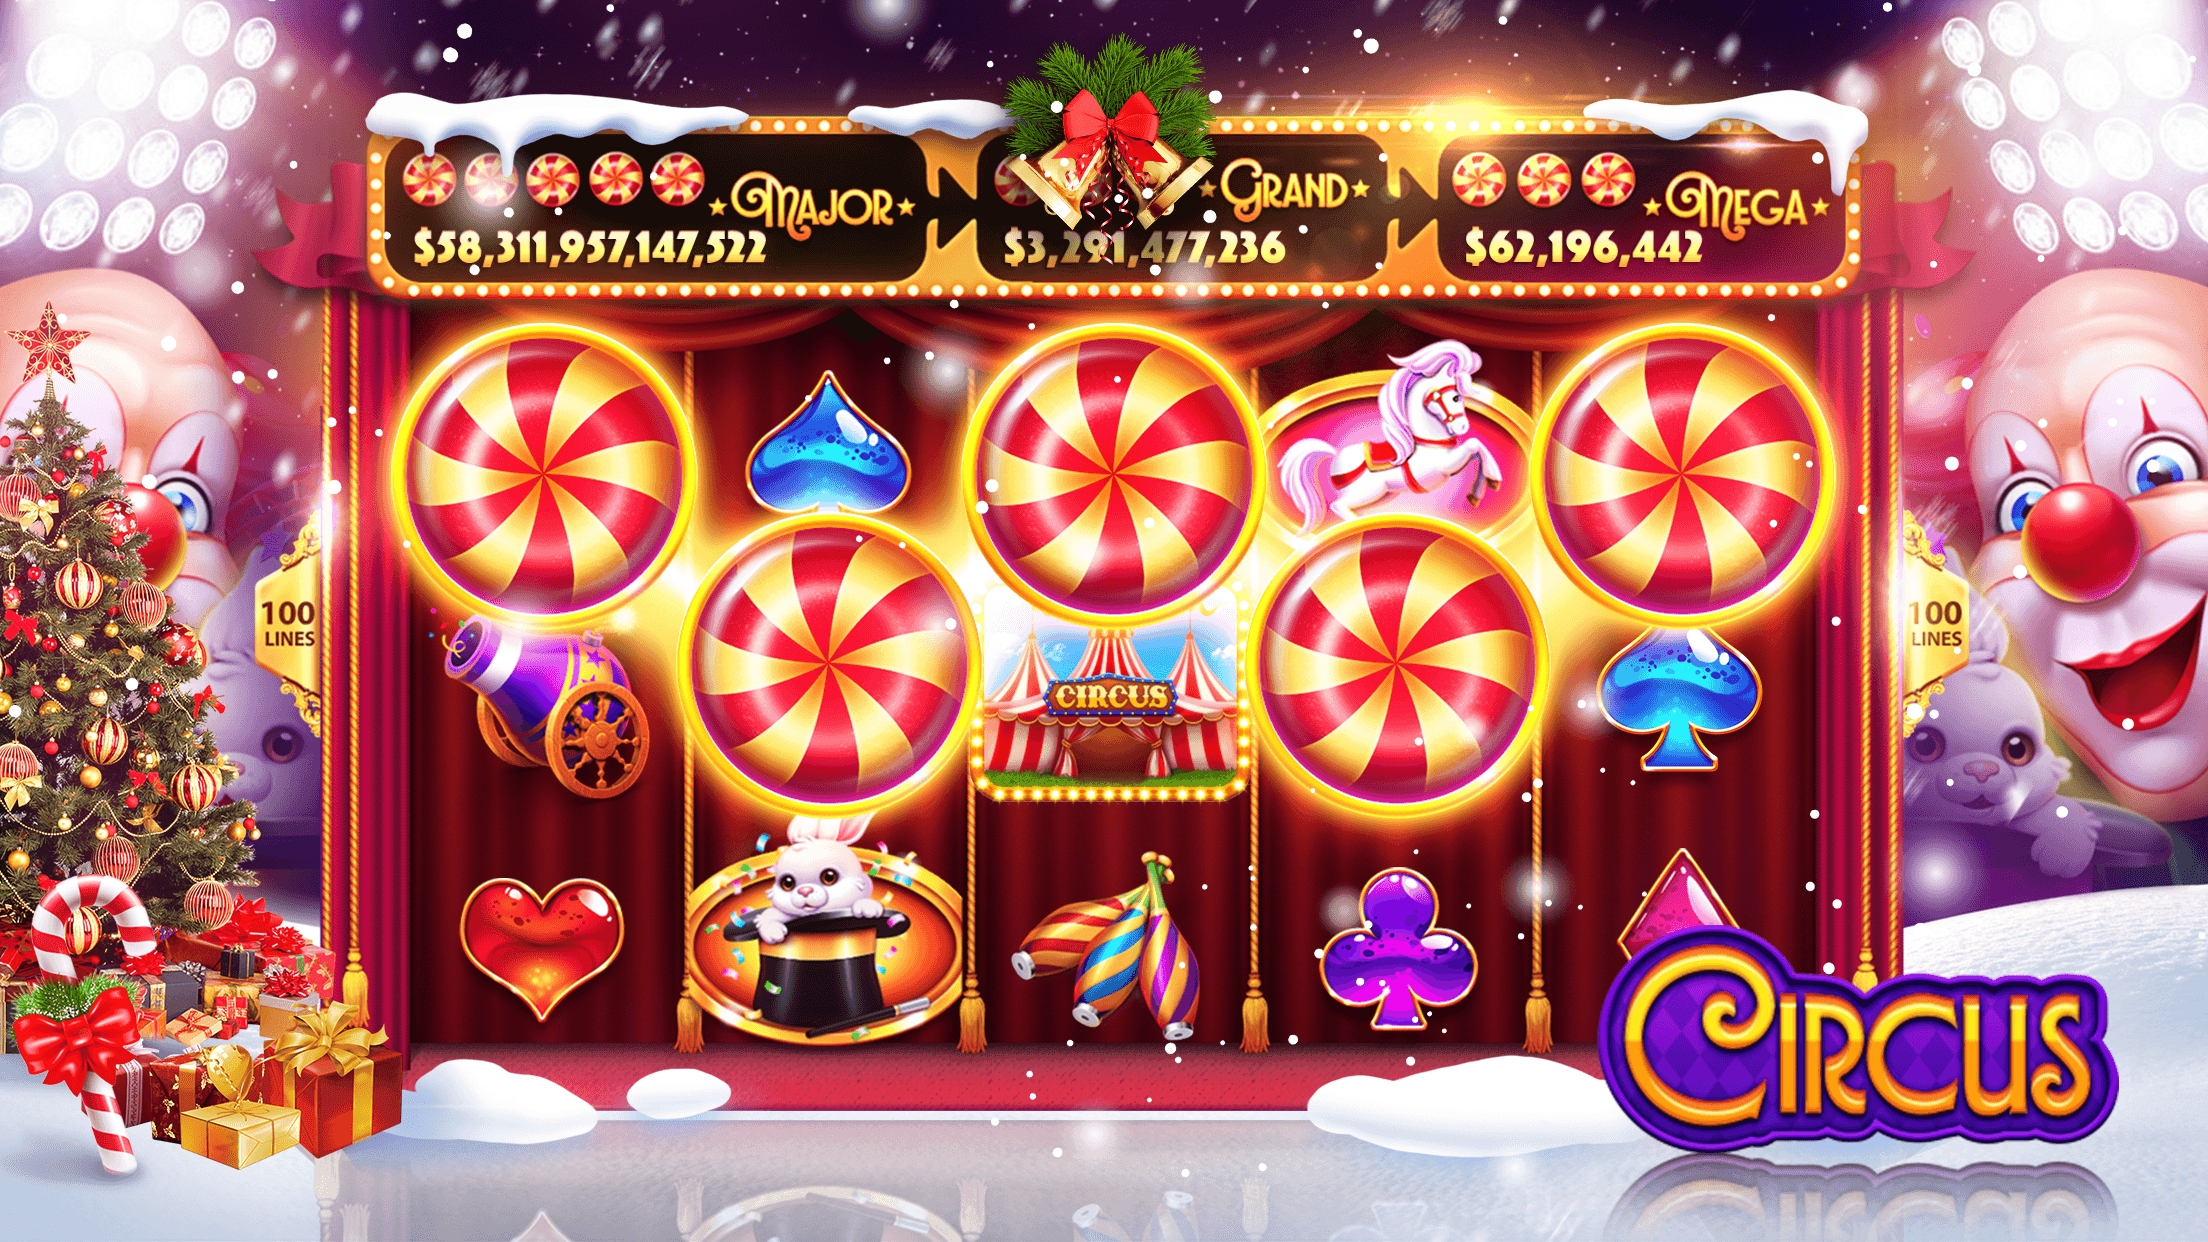 2 days ago · Free online slots for real money.Some casinos offer free online slots with no download for real money prizes.You can really play slot machine games without any deposits and still have a shot at winning awards.Often, these kinds of slots are offered for promotional reasons.Some websites sponsor slots games of online casinos/advertisers.The.